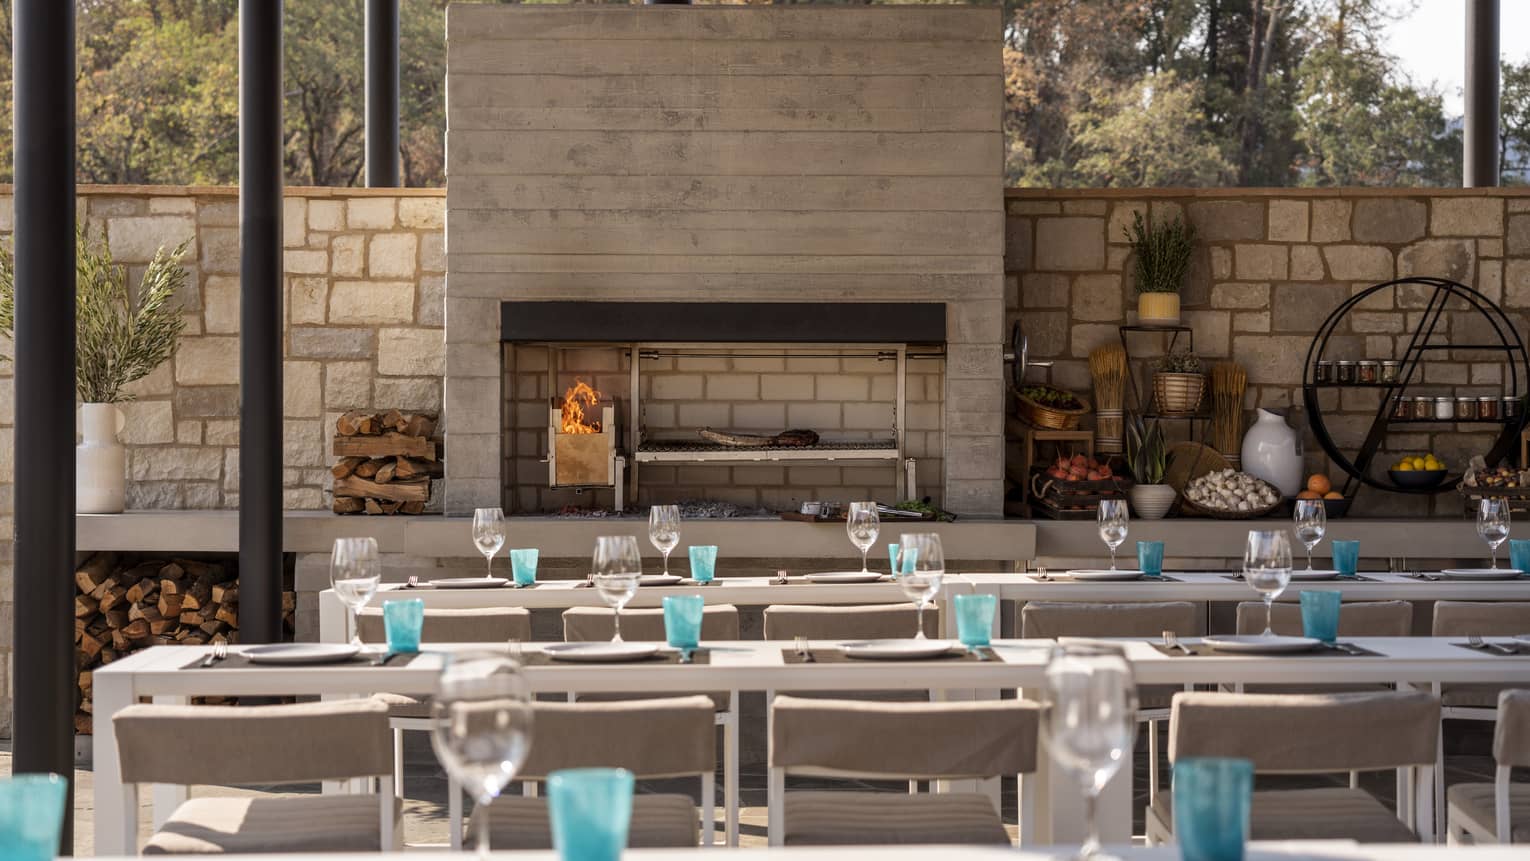 Rows of tables outside near a fire place and a stone wall.